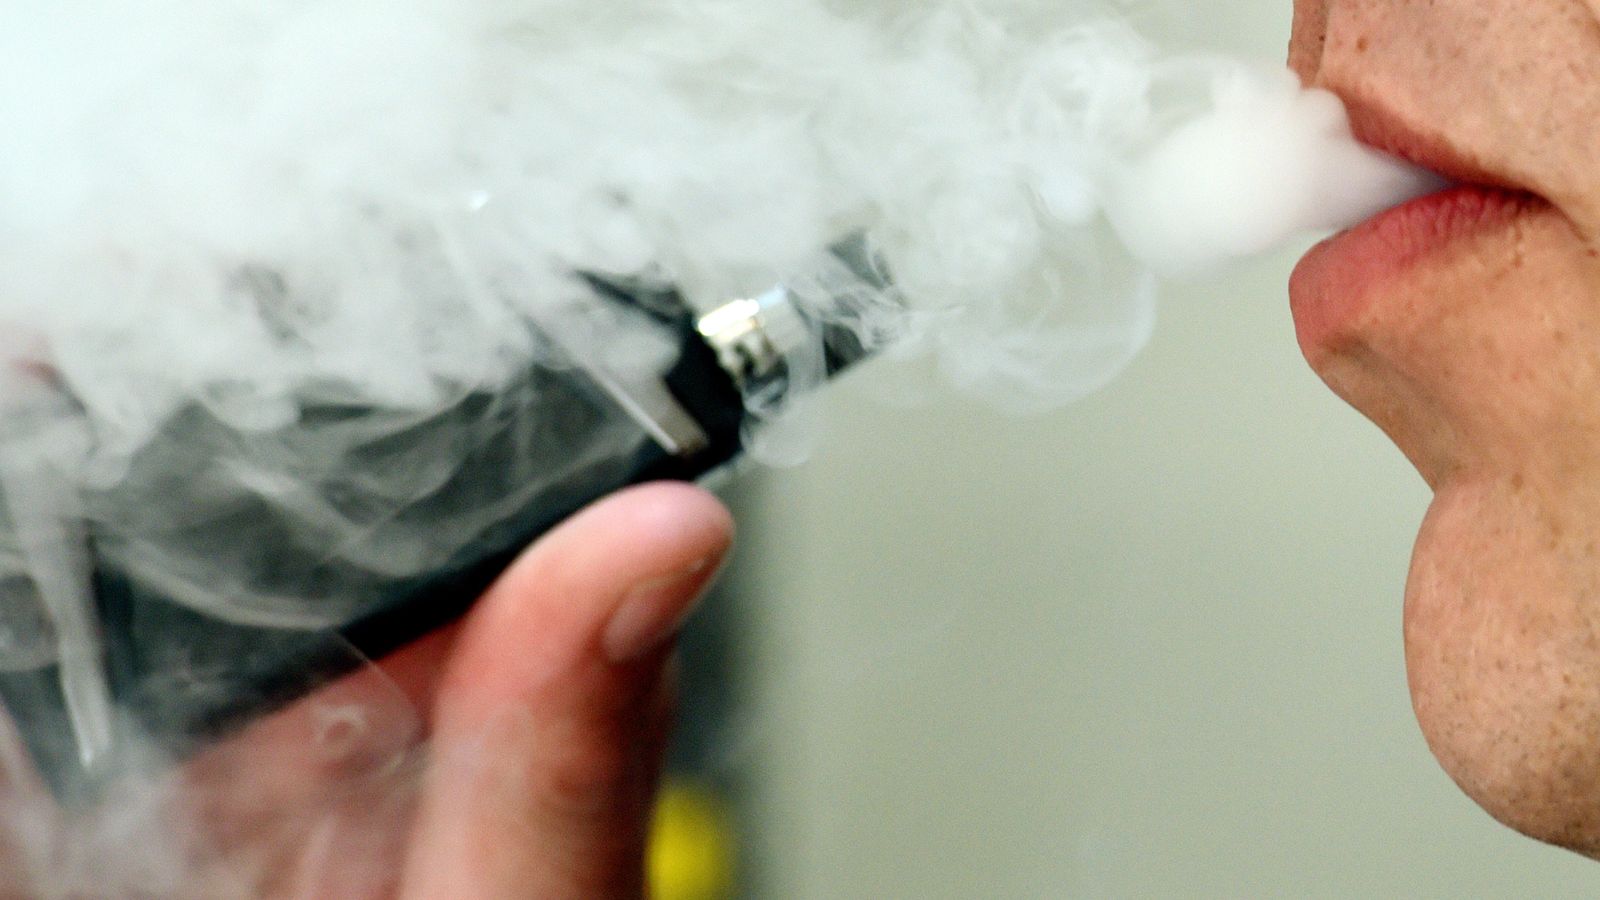 Single-use e-cigarettes: Local councils call for disposable vapes to be banned in UK by next year